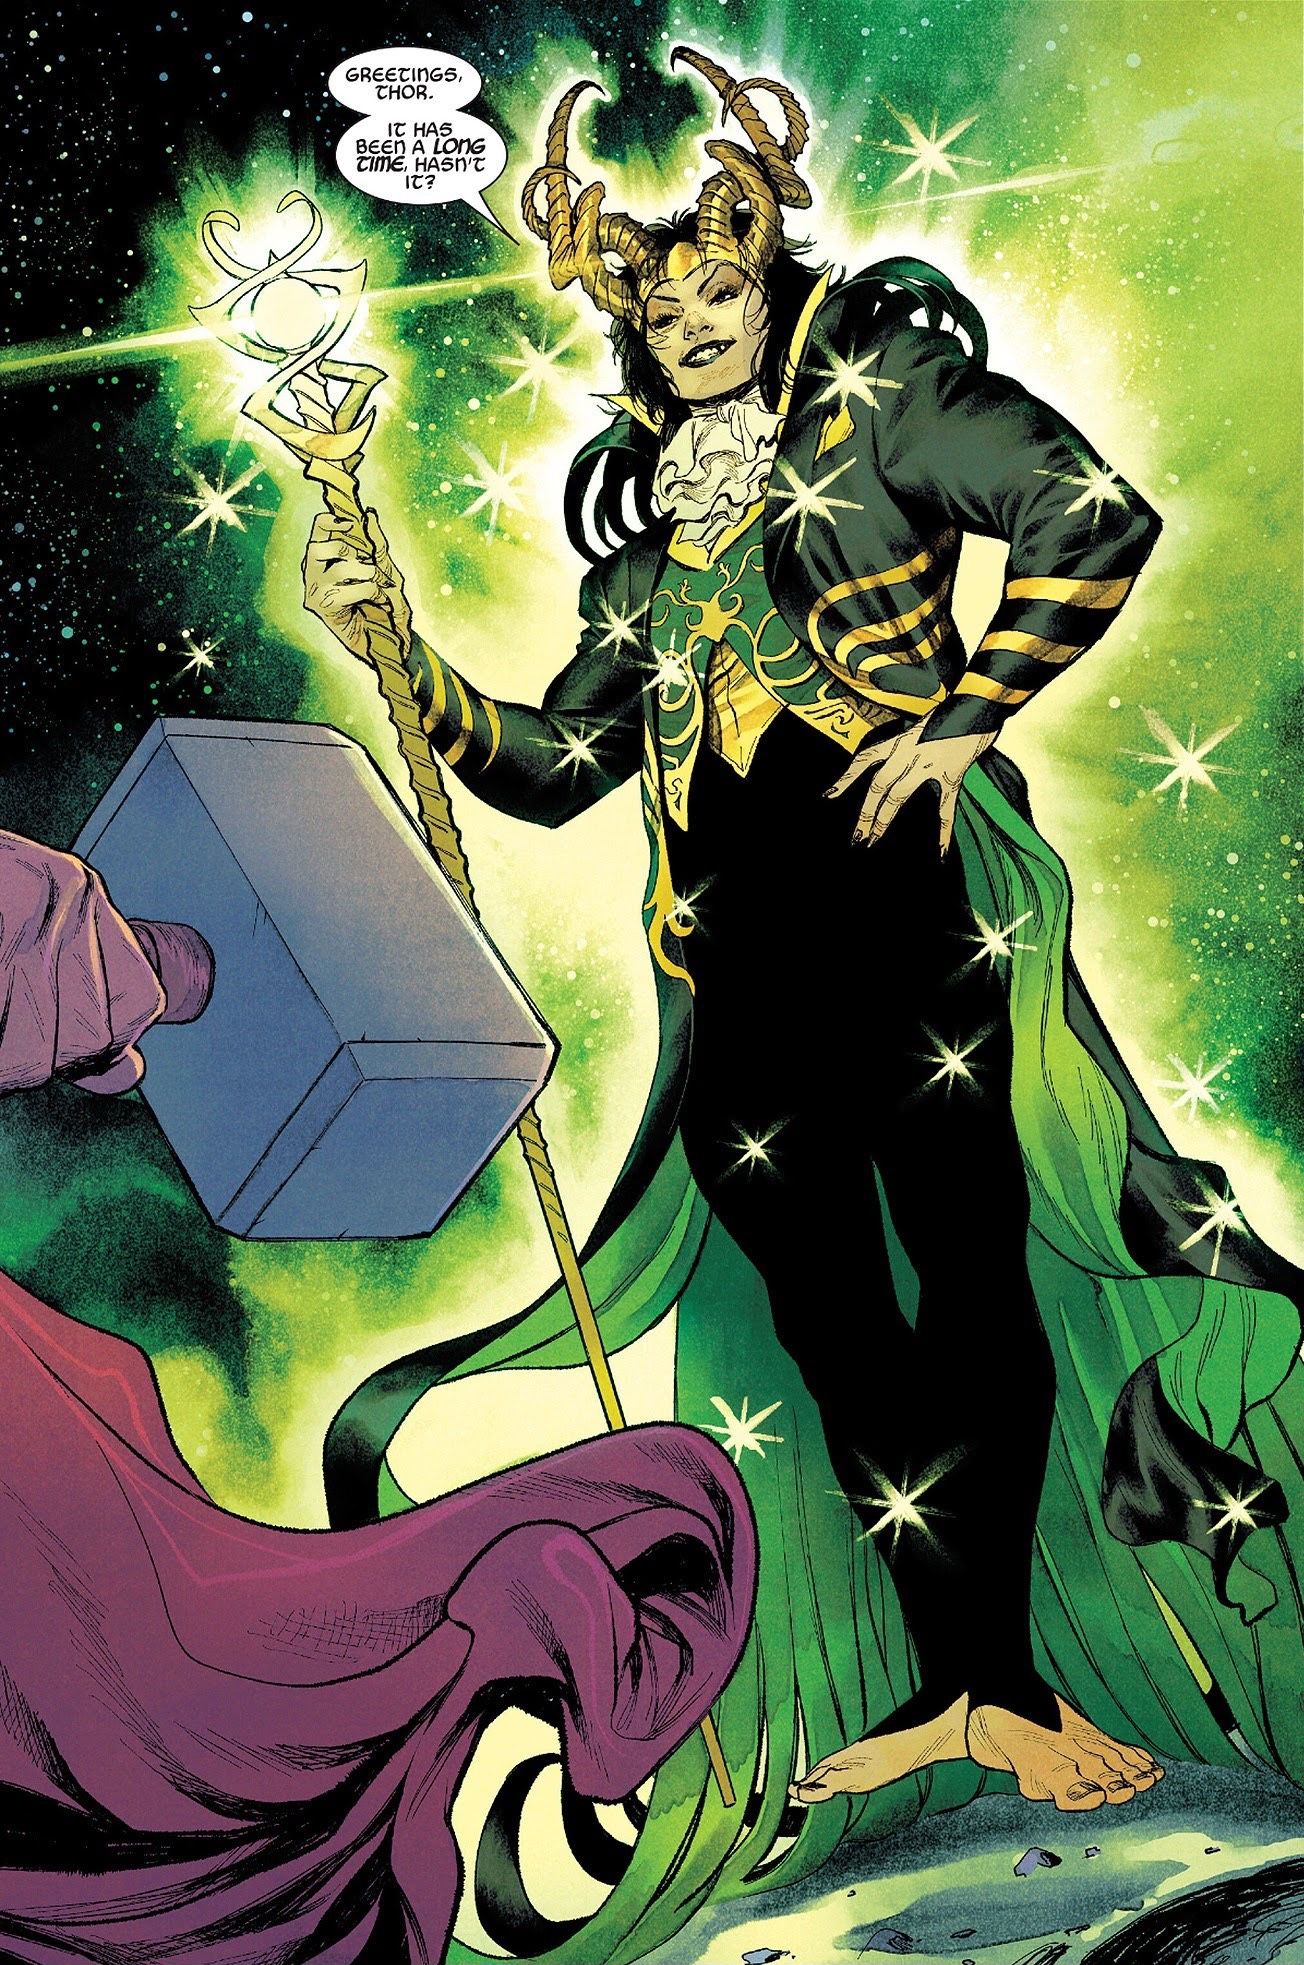 page from Immortal Thor #2, Loki returns as the Teller of Tales